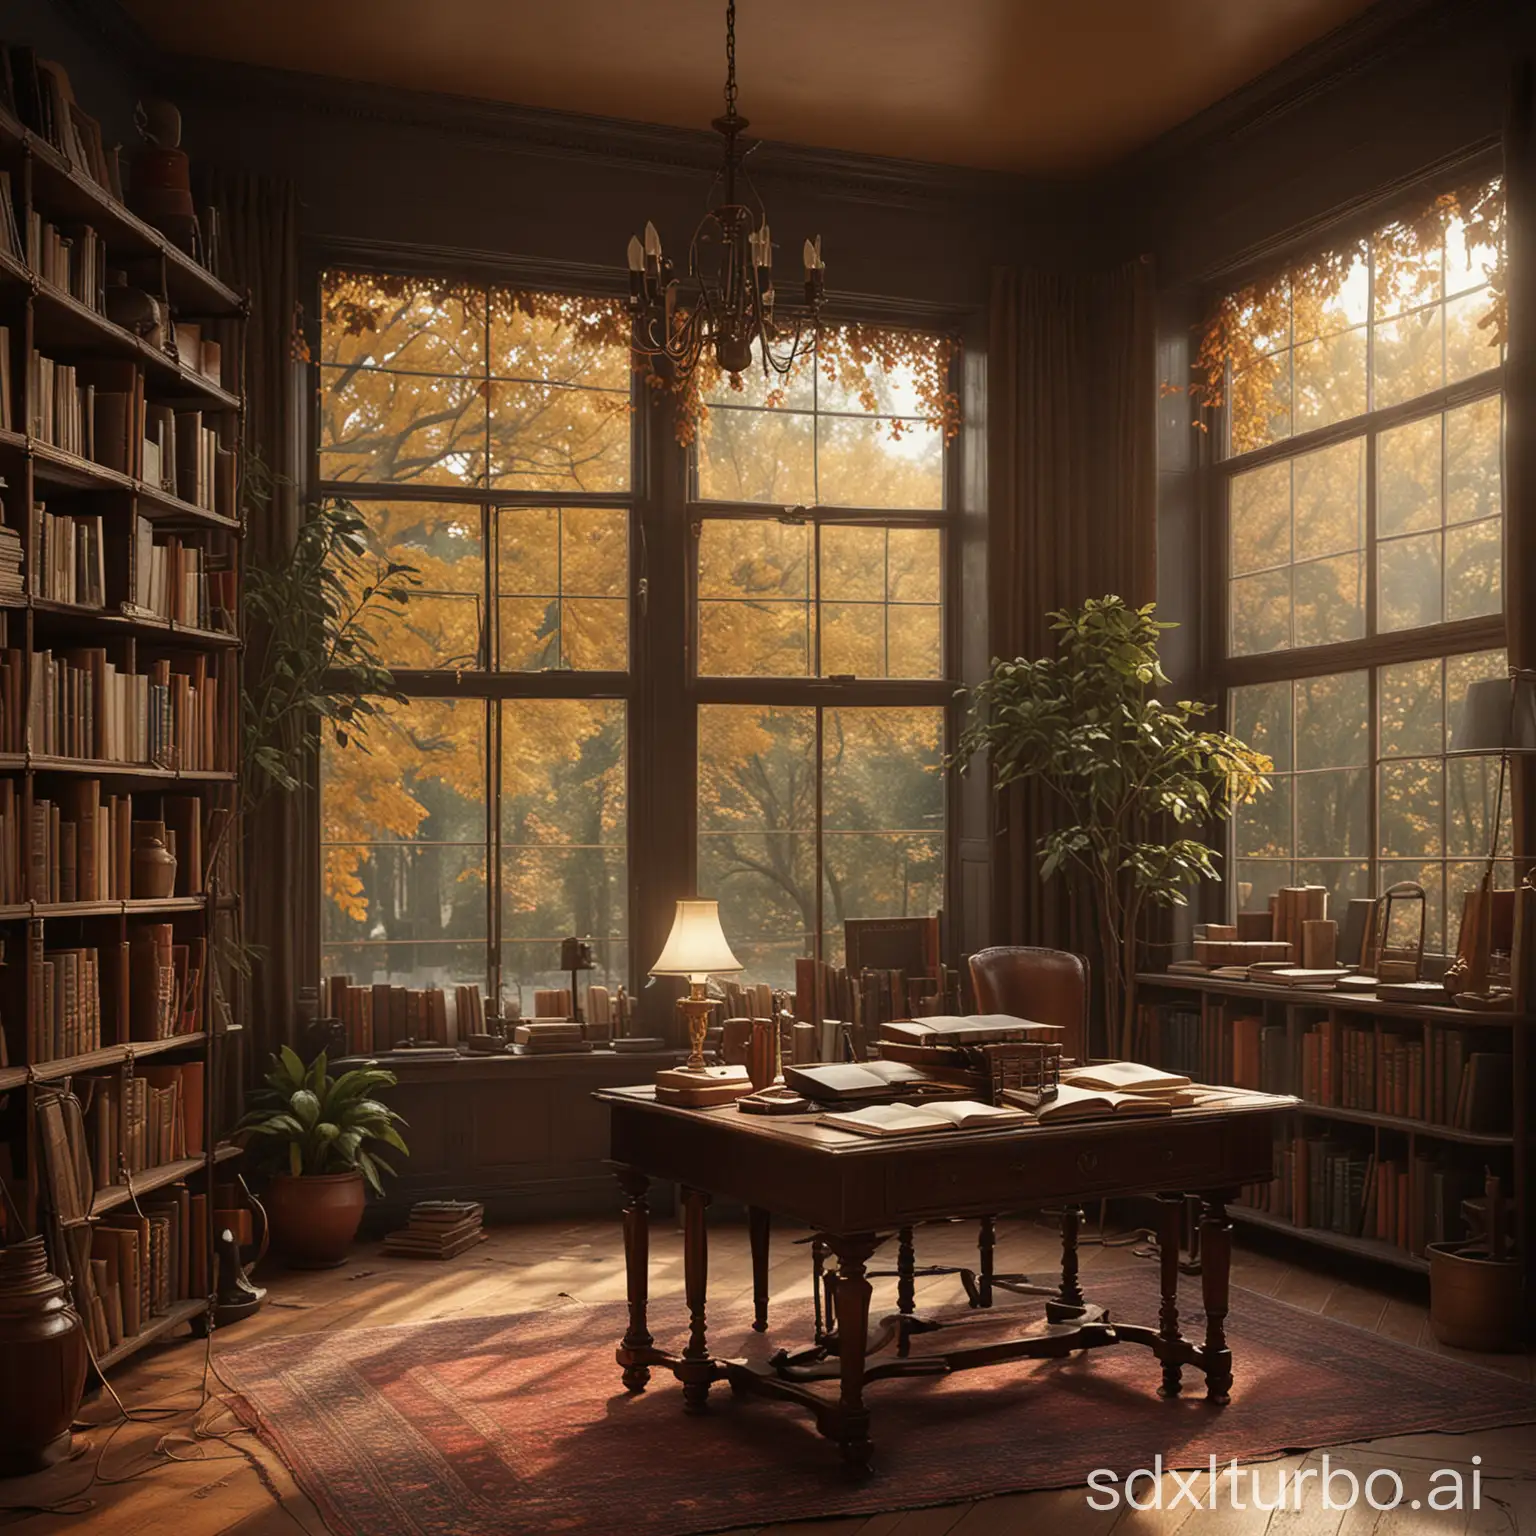 Type of Image: Photorealistic Image - Subject Description: A vintage research library with dark wooden bookshelves filled with leather-bound books, antique desks with brass lamps, a cozy fireplace, and large windows overlooking a serene garden with autumn leaves falling. - Art Styles: 1950s, Vintage - Art Inspirations: Retro Architecture, Mid-century Modern - Camera: Sony A7 III - Shot: Medium shot - Render Related Information: High resolution, detailed, warm ambient lighting Re